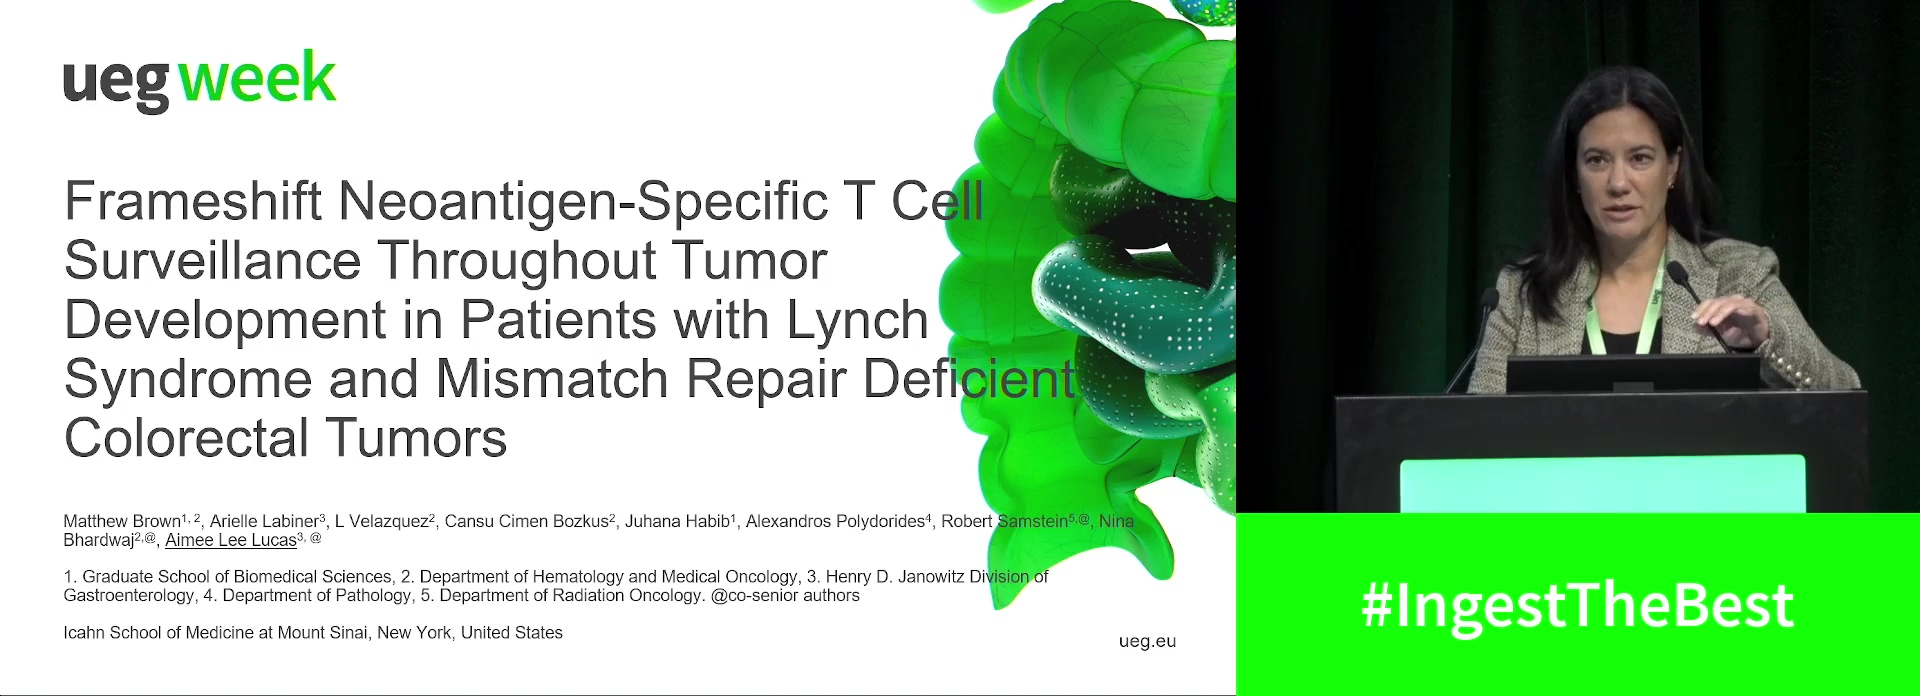 FRAMESHIFT NEOANTIGEN-SPECIFIC T CELL SURVEILLANCE THROUGHOUT TUMOR DEVELOPMENT IN PATIENTS WITH LYNCH SYNDROME AND MISMATCH REPAIR DEFICIENT COLORECTAL CANCER